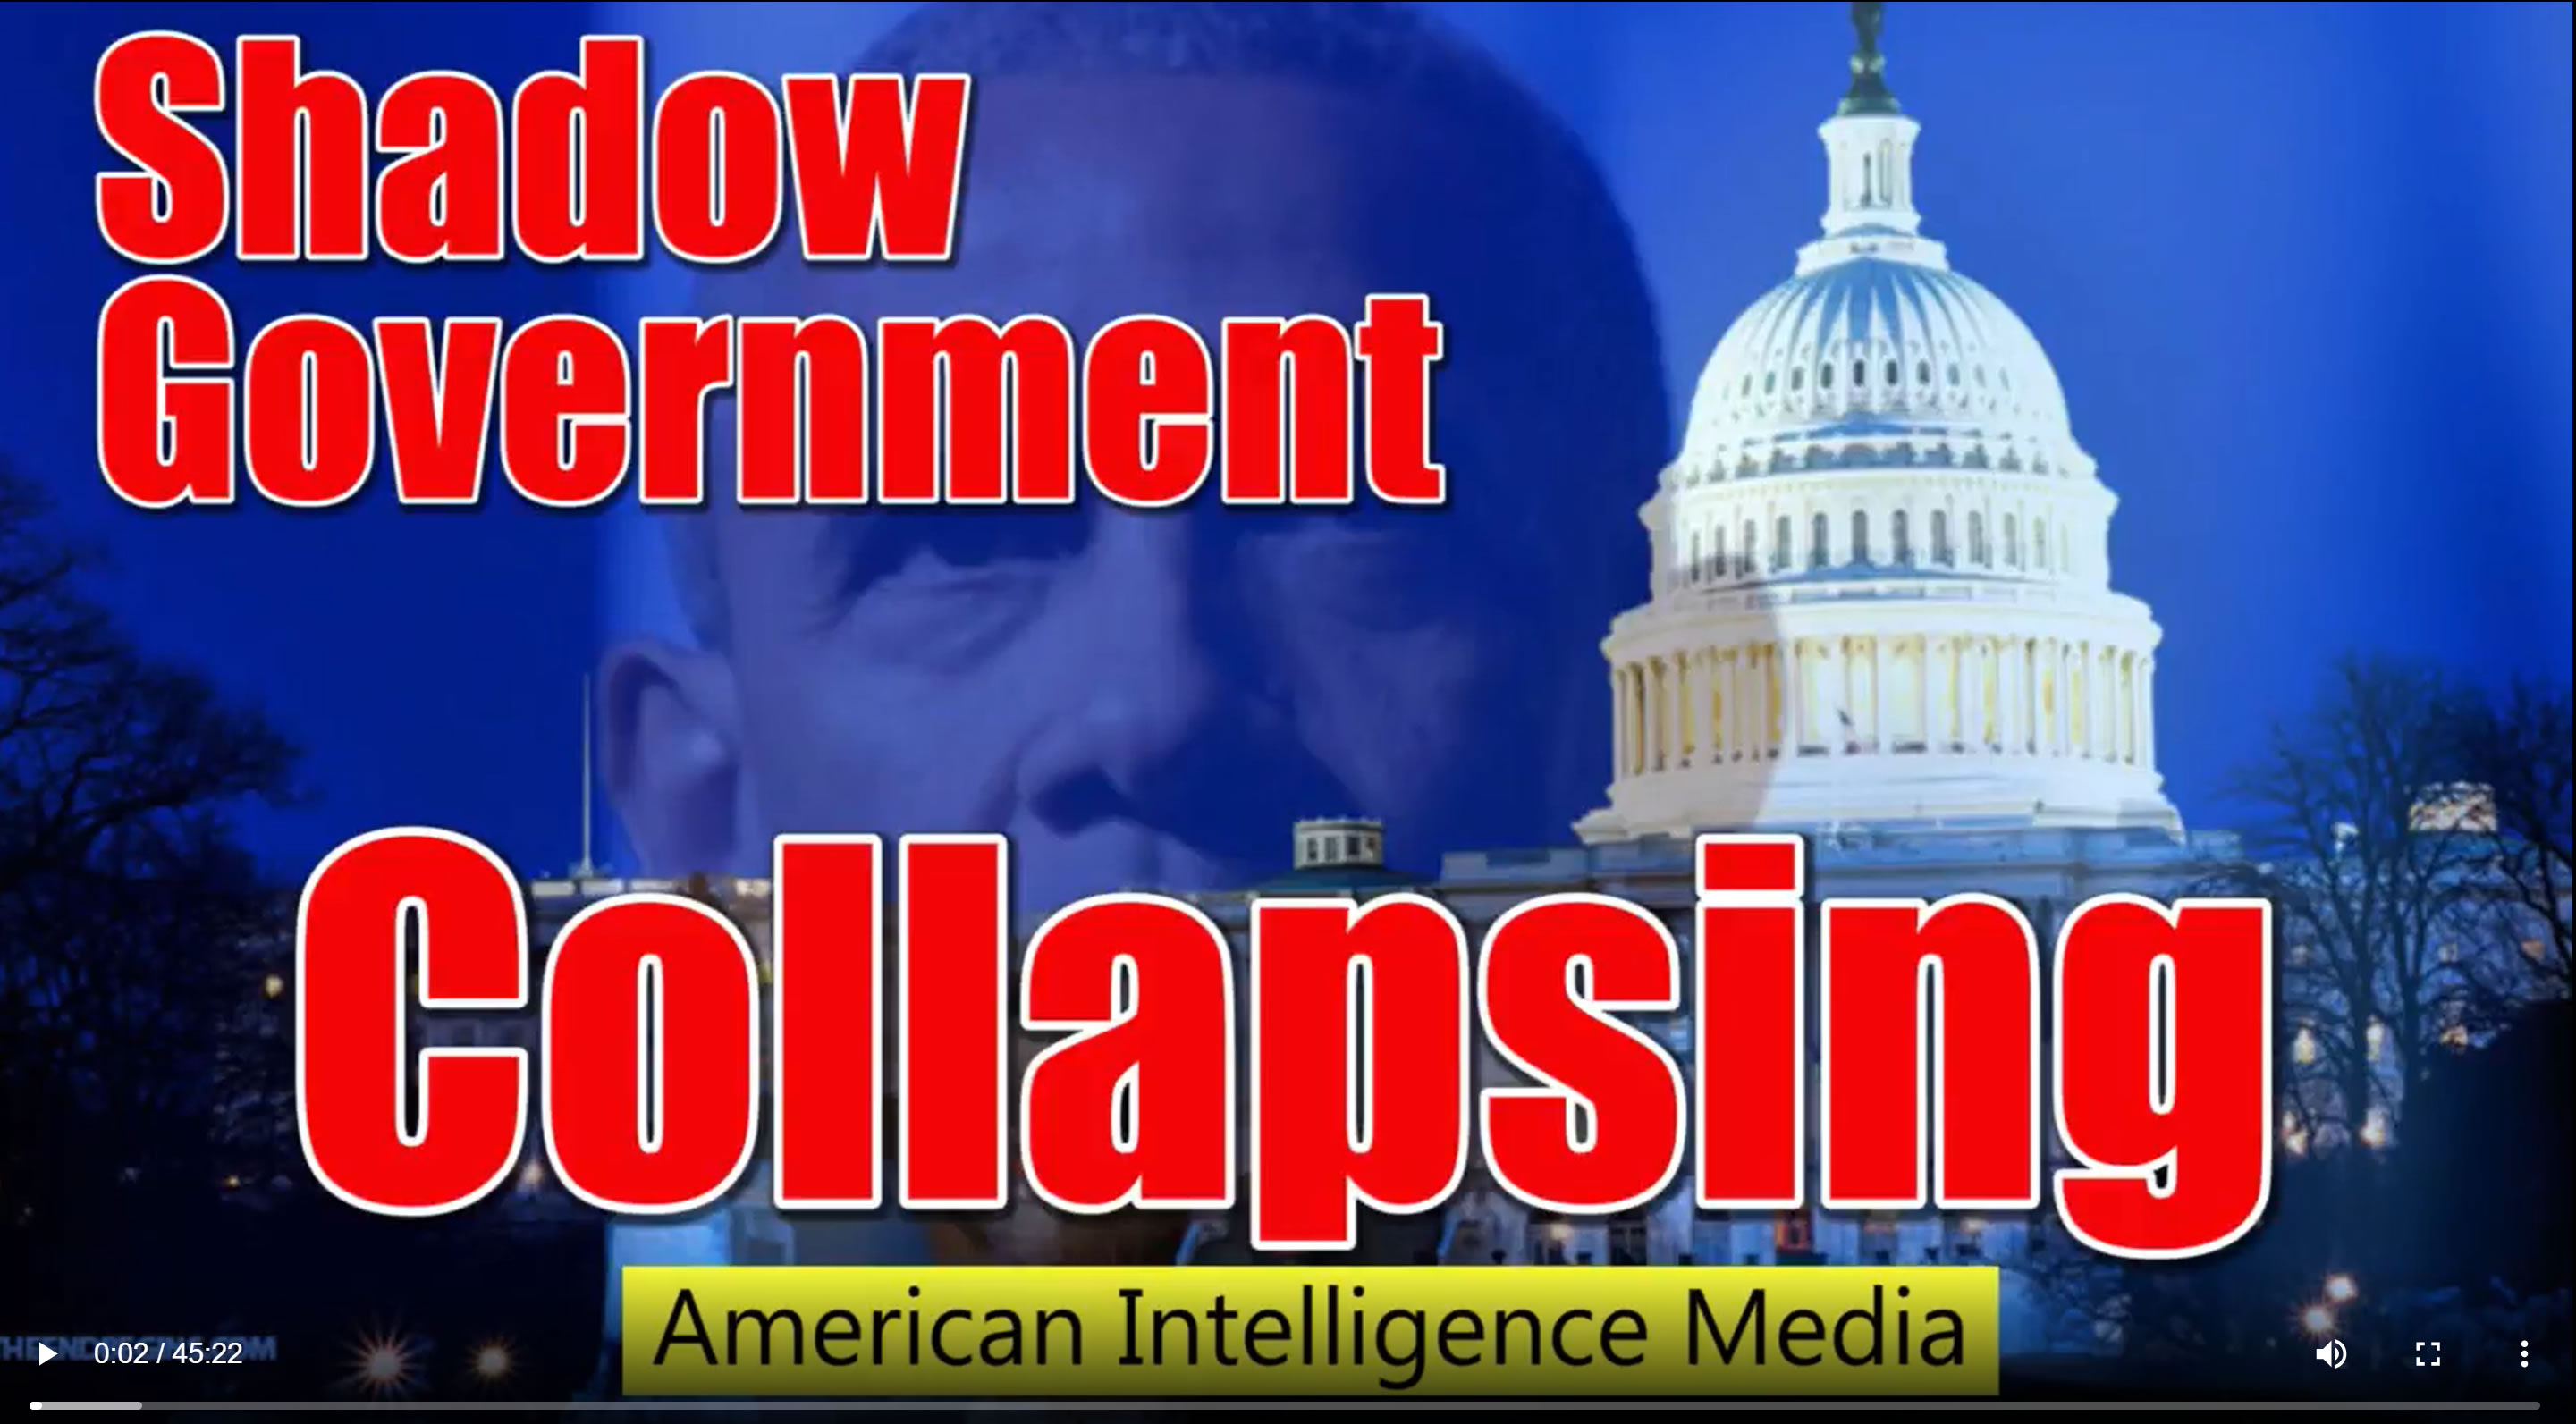 Thomas Paine, Michael McKibben. (Mar. 18, 2018). Shadow Government is Collapsing. American Intelligence Media, Americans for Innovation.